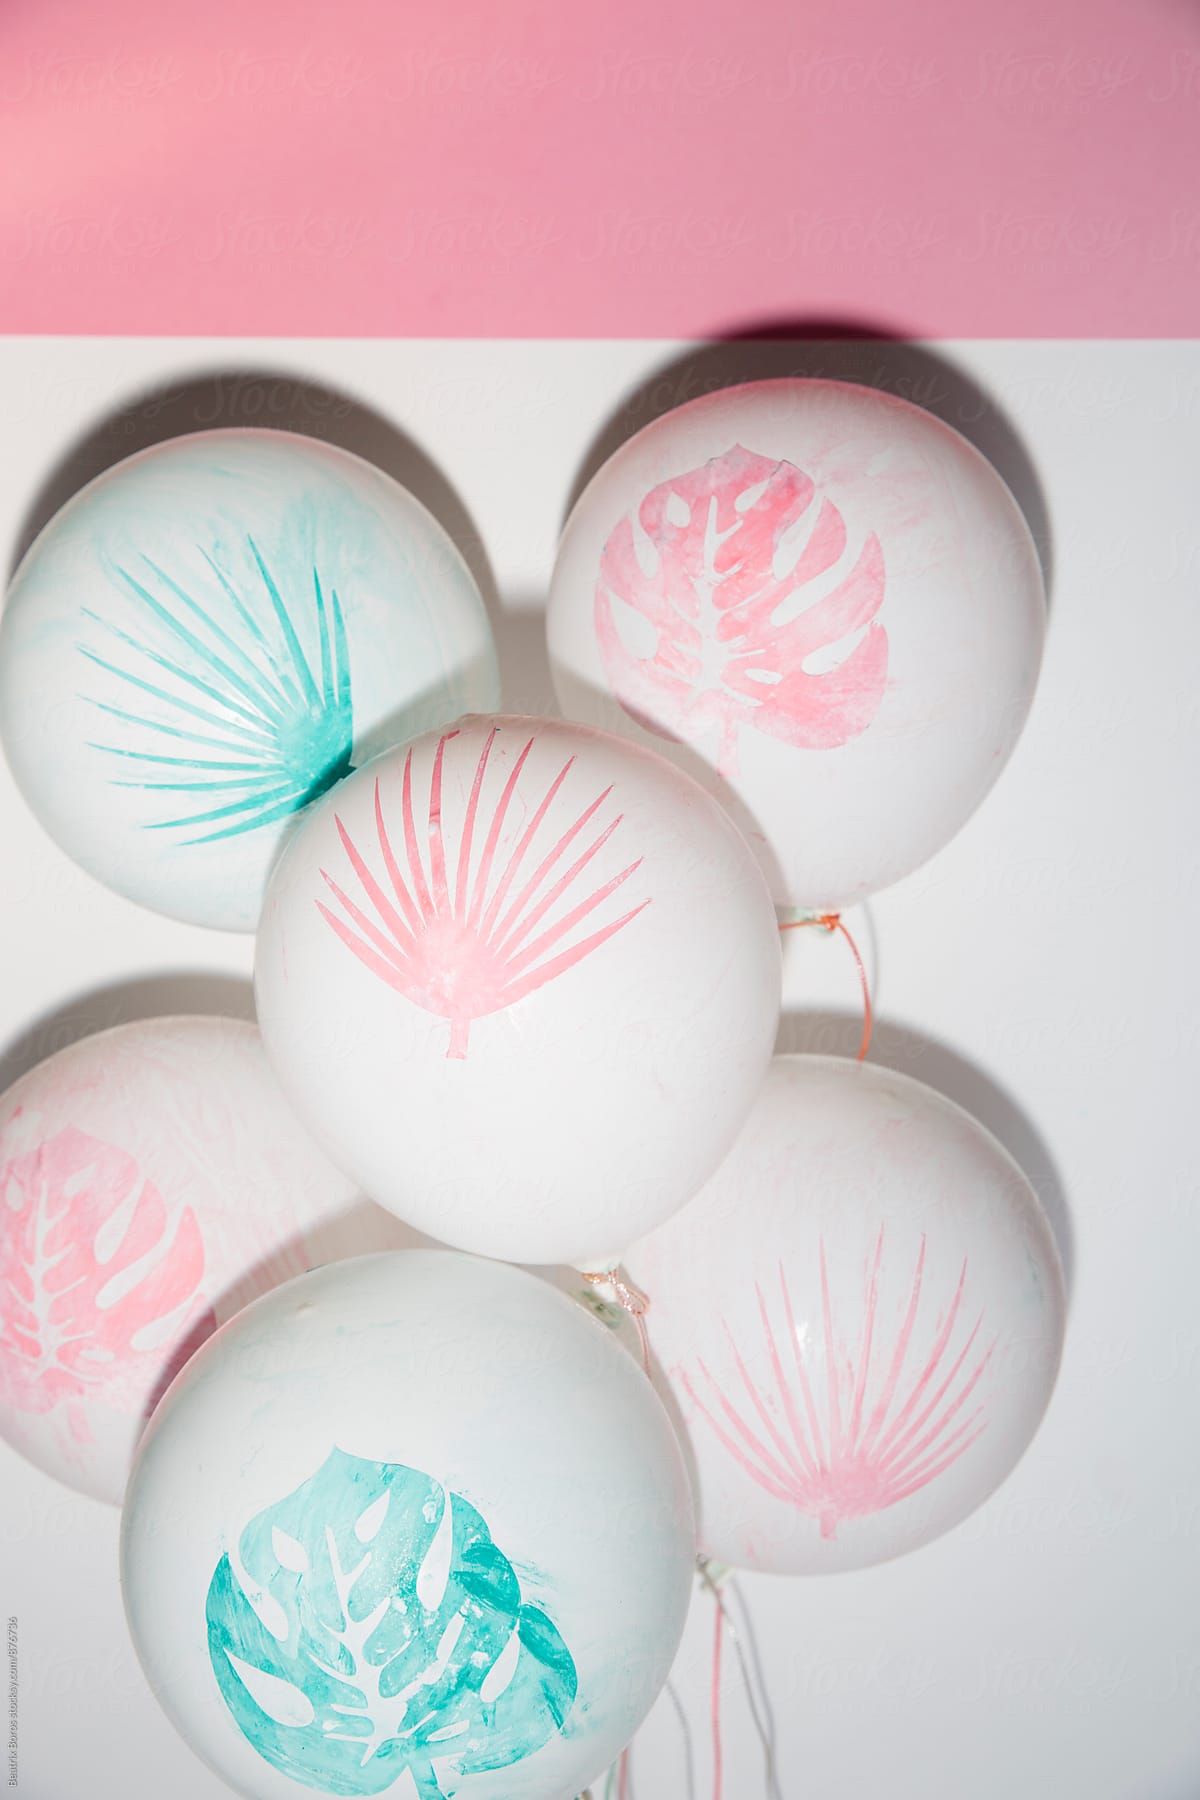 Festive hand painted summer balloons on white and pink background